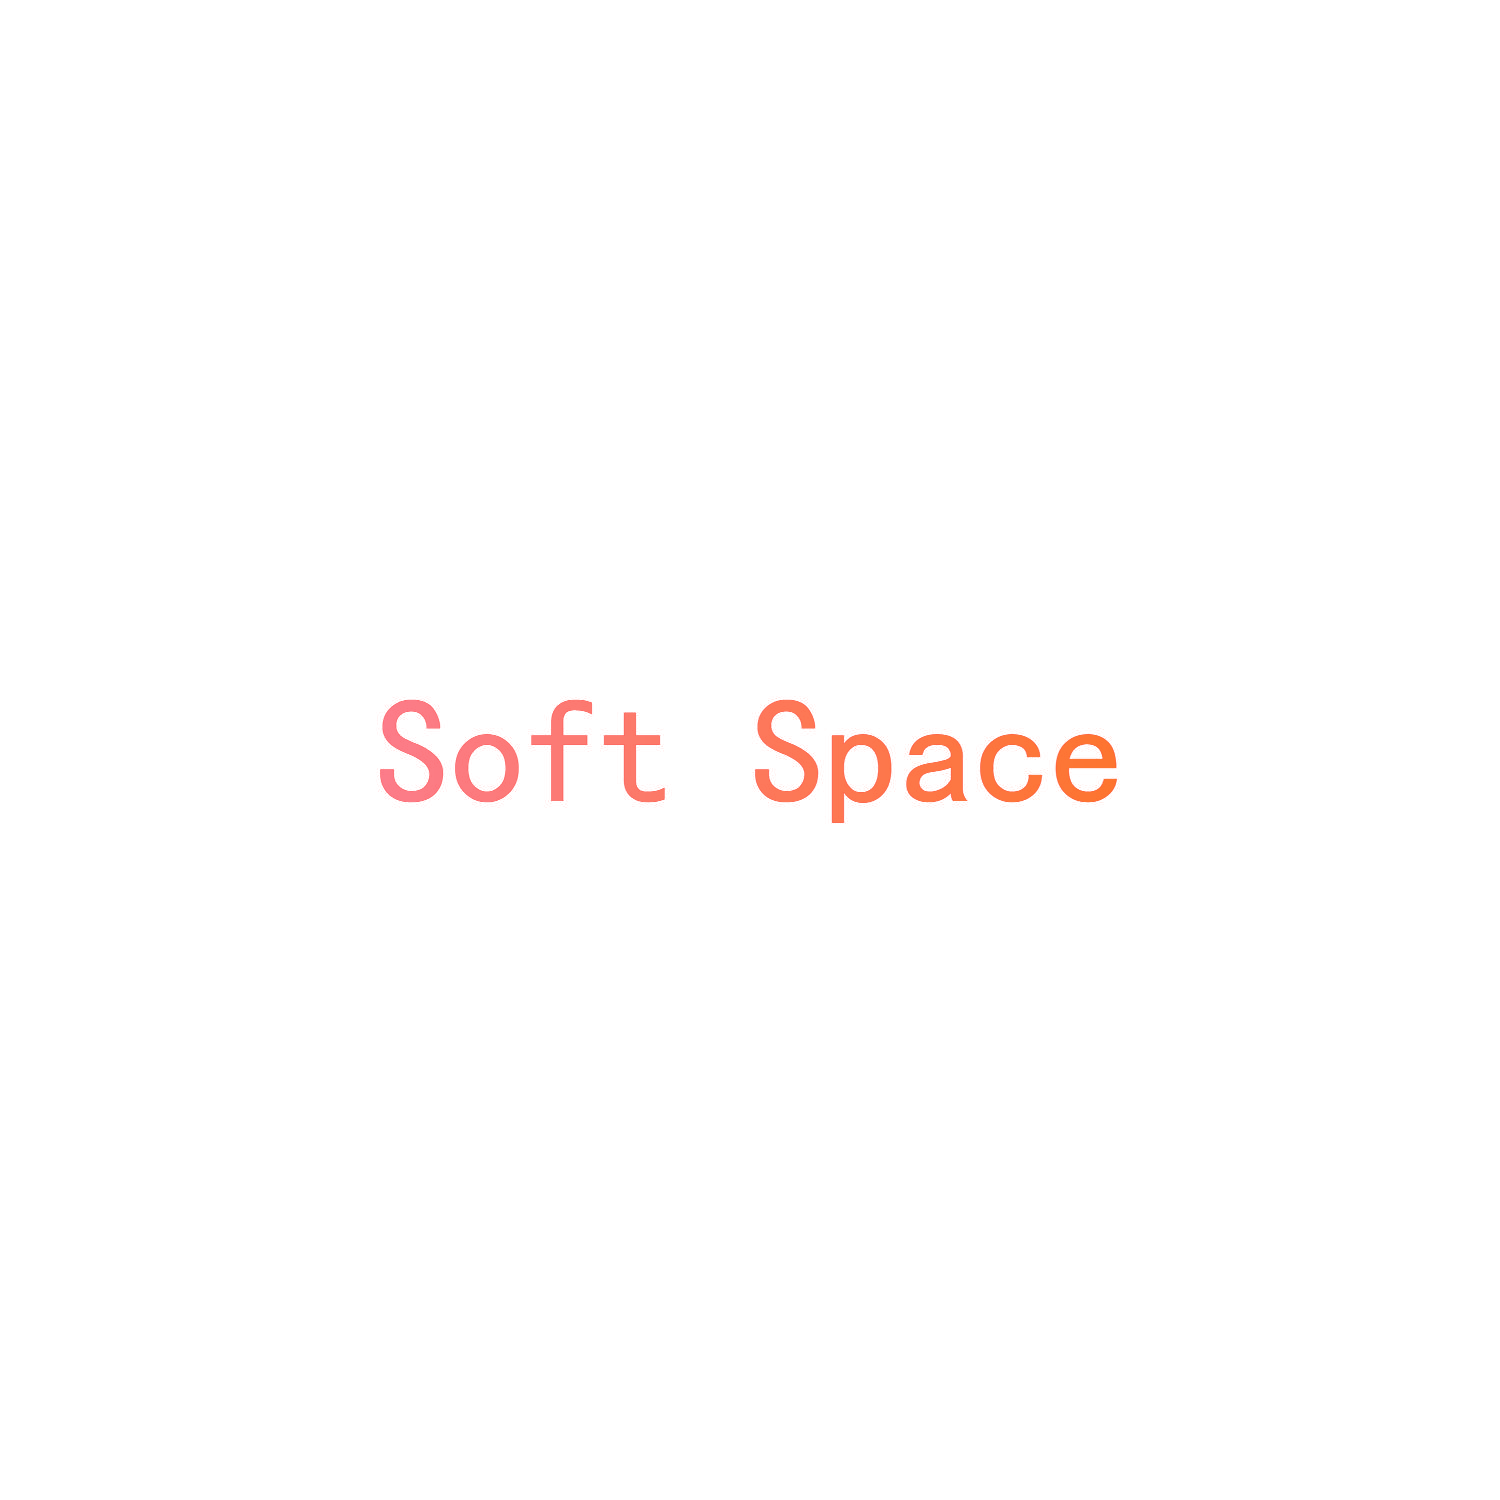 SOFT SPACE